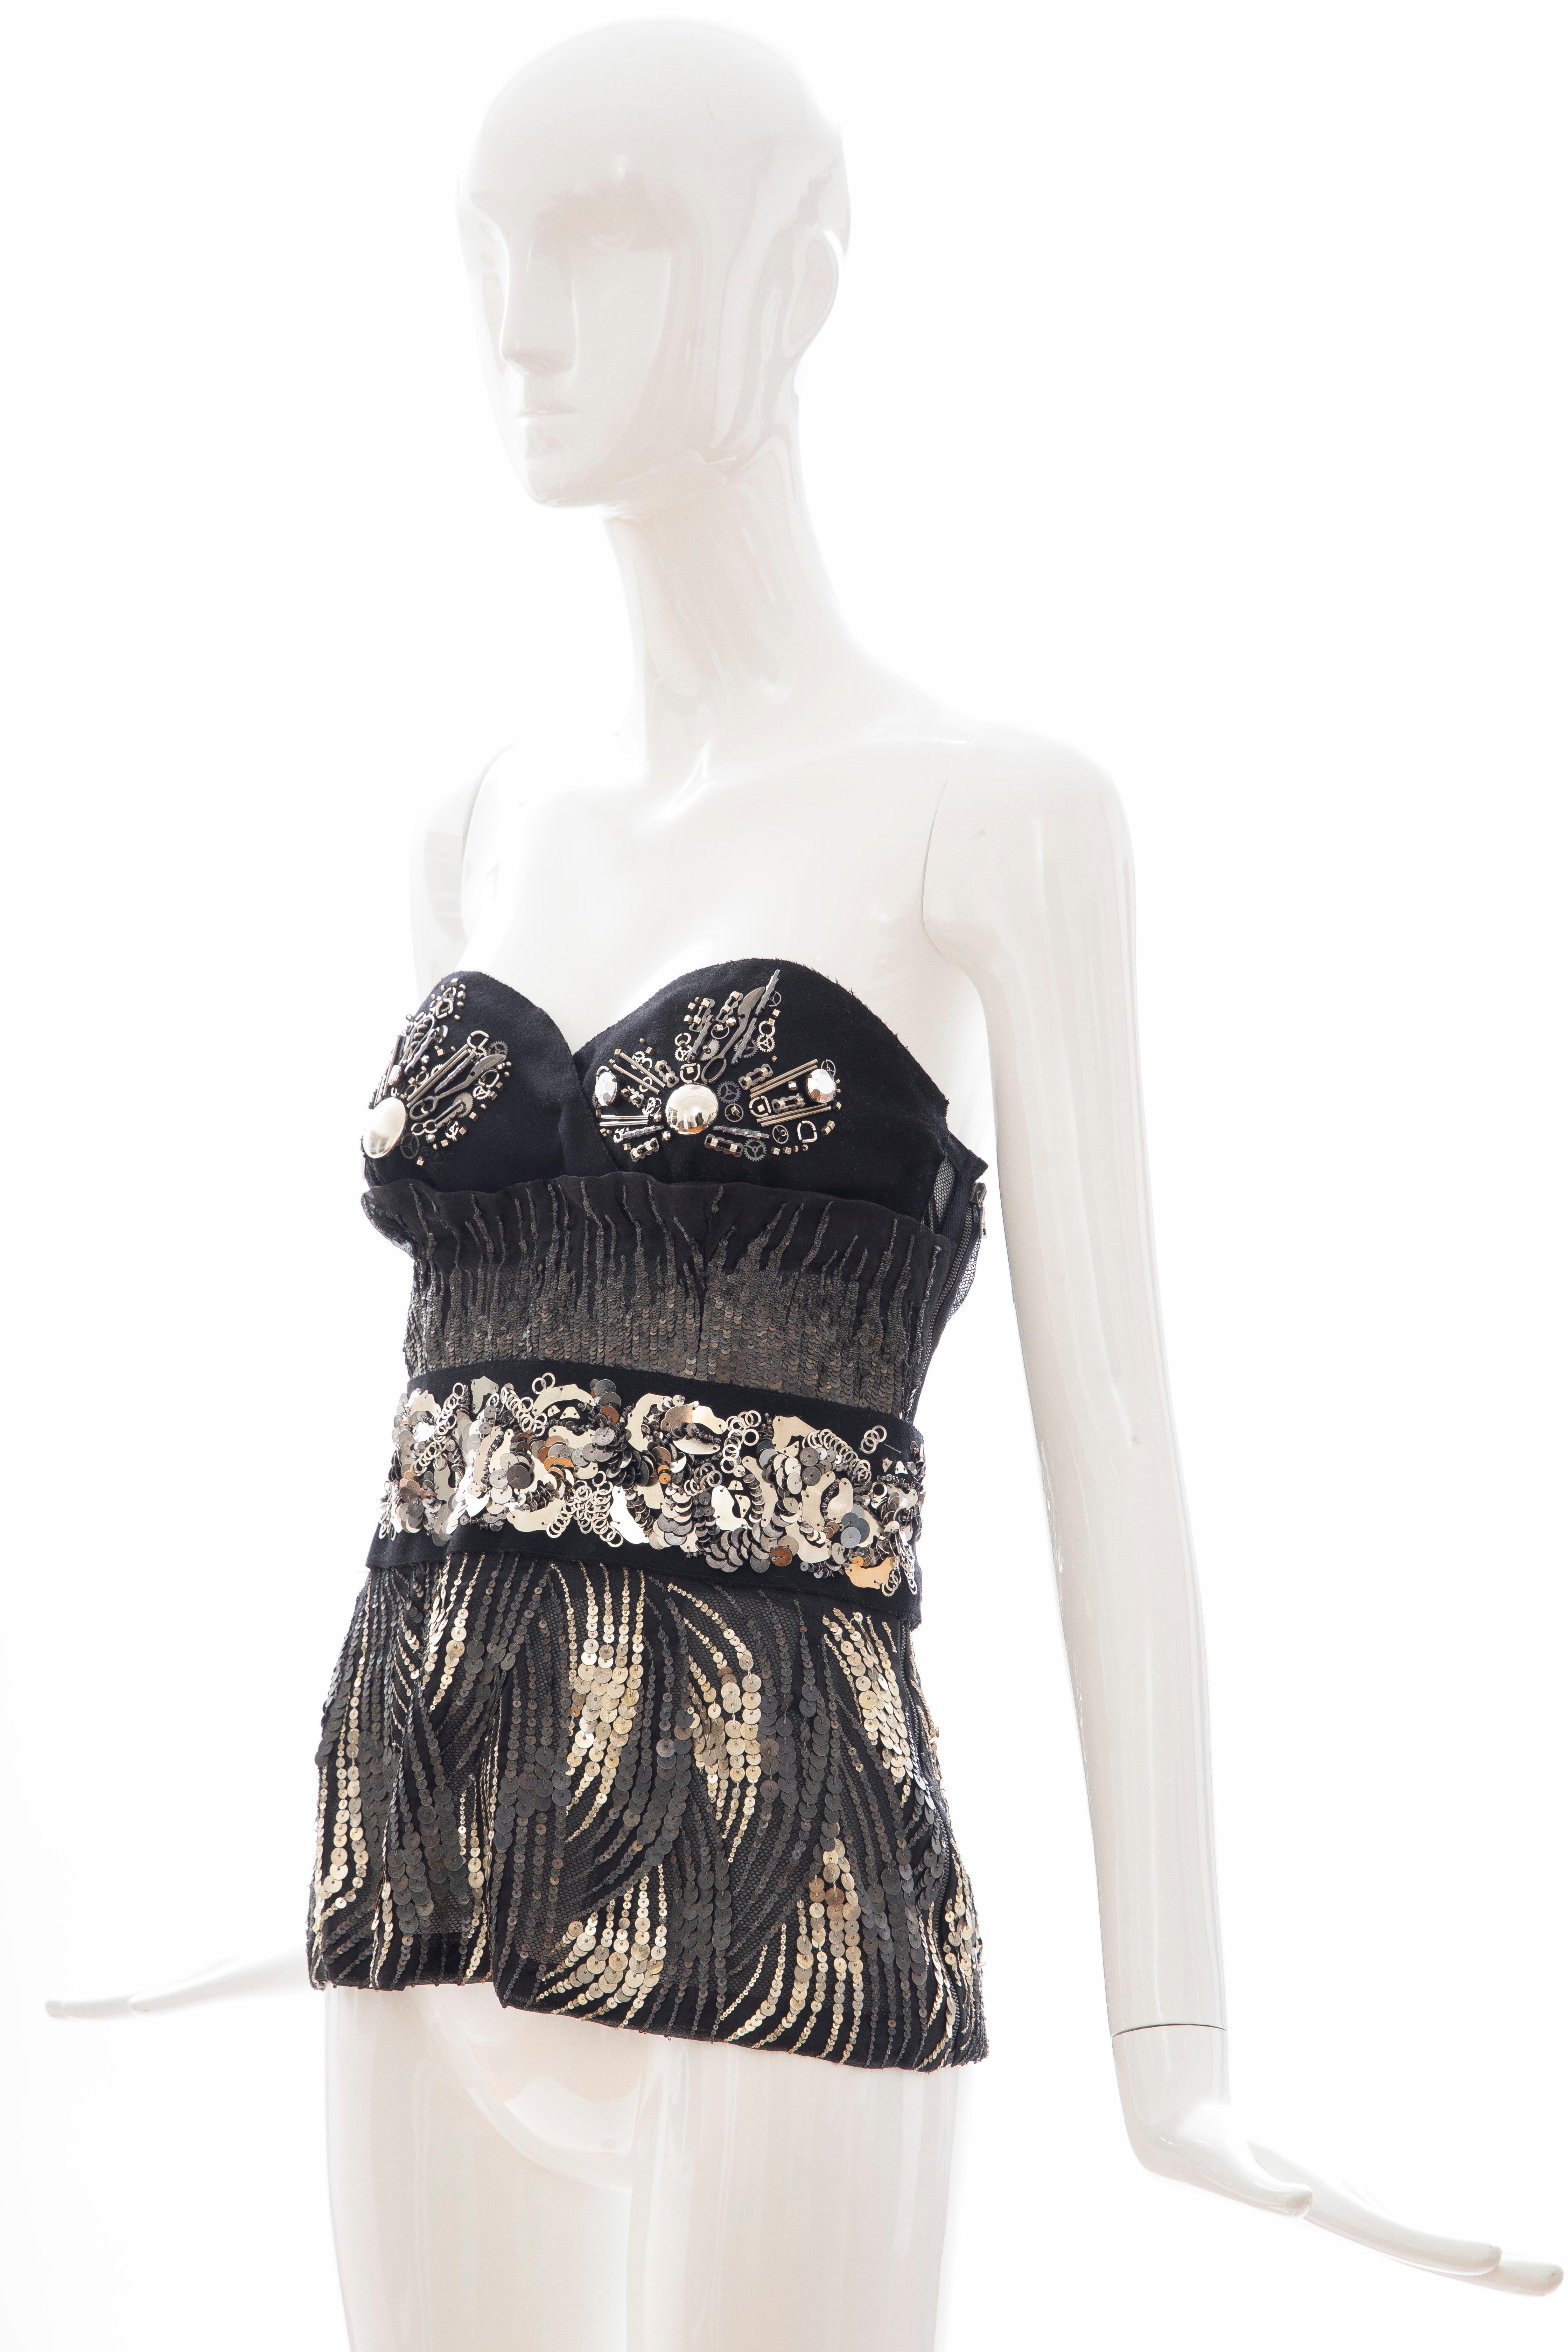 Prada Runway Black Strapless Embroidered Sequin Top, Fall 2006 For Sale 1